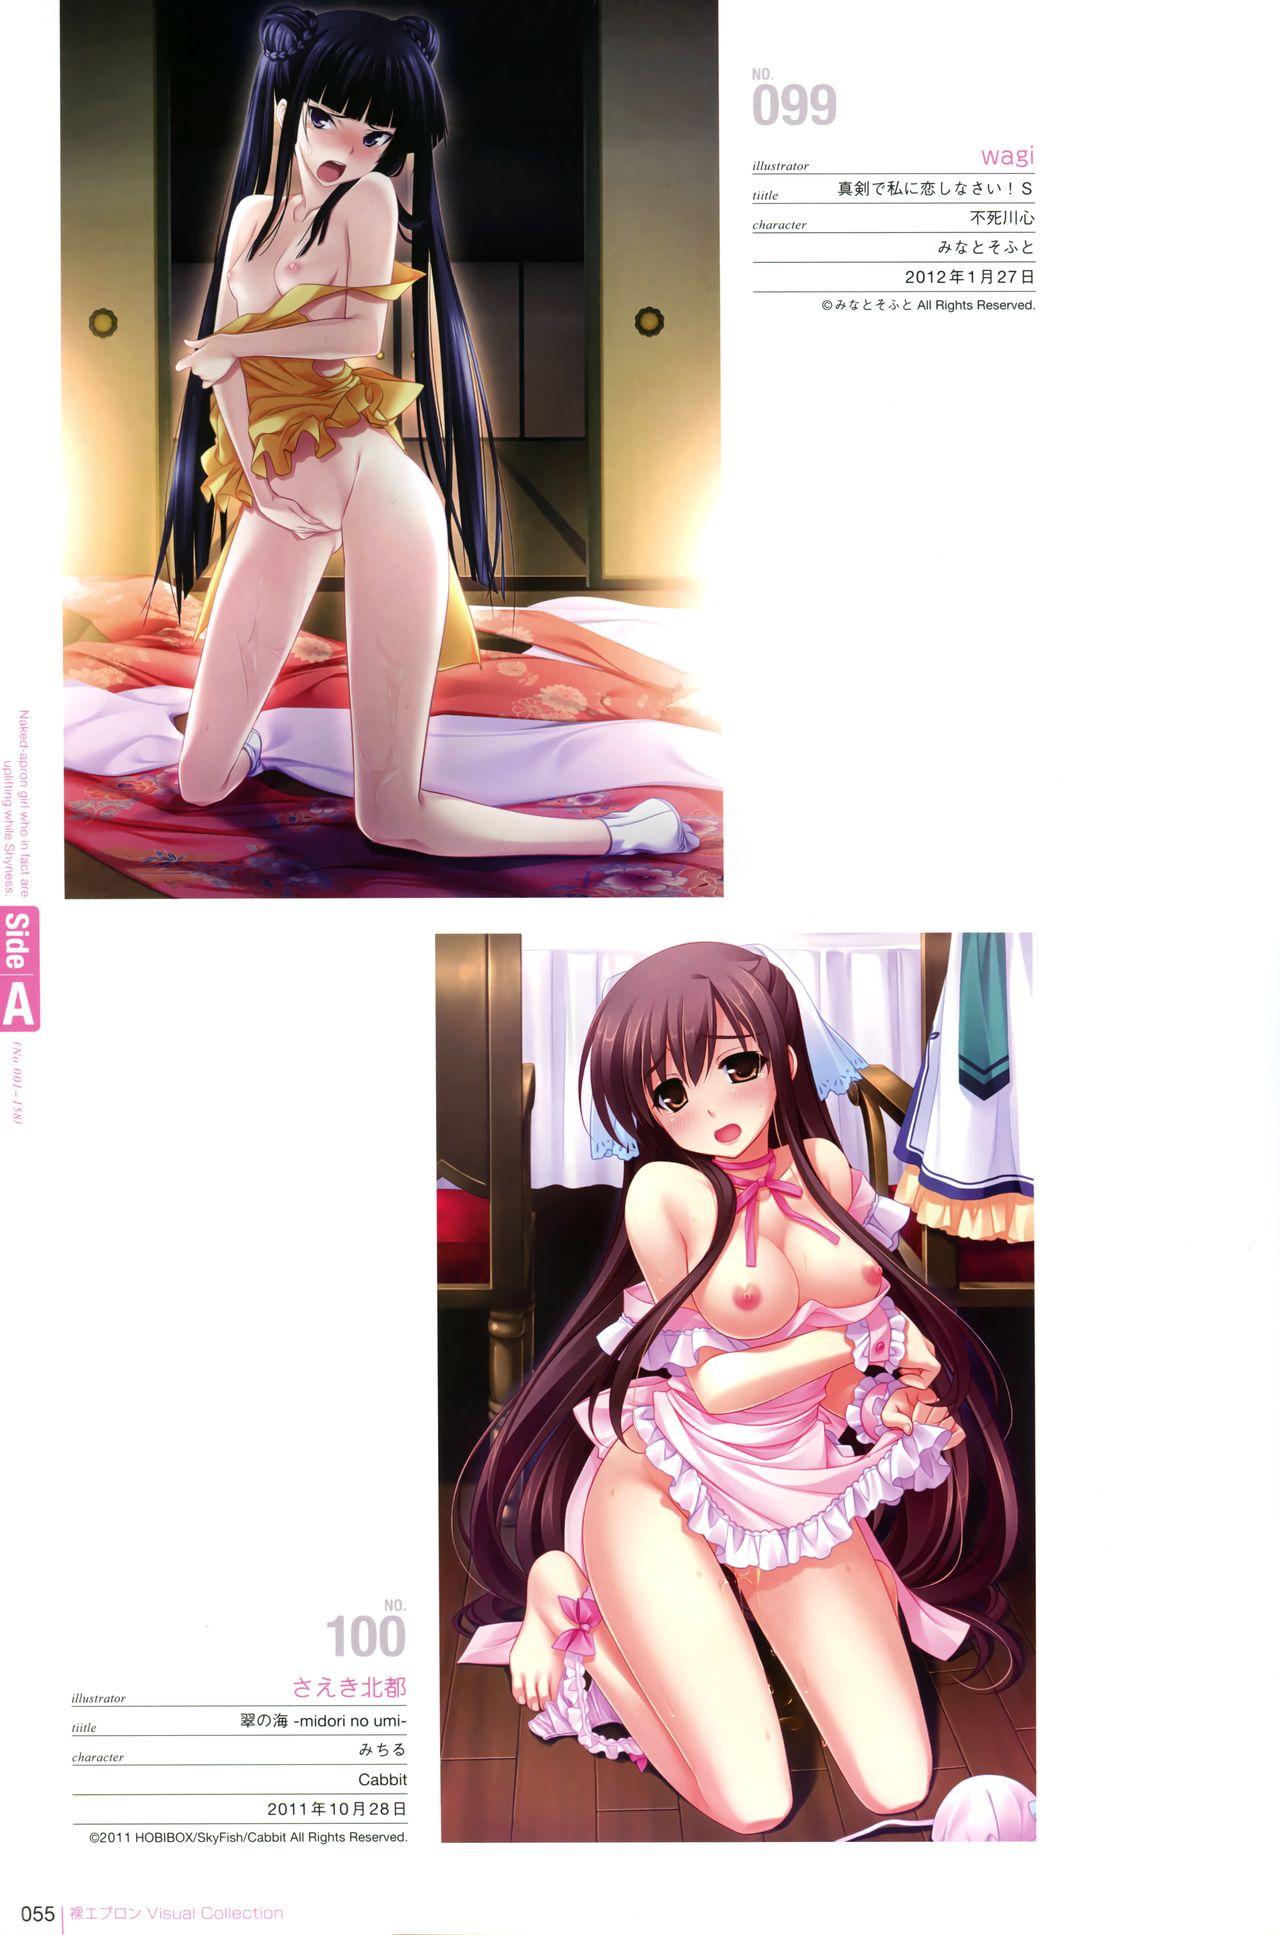 Naked Apron Visual Collection Final 50